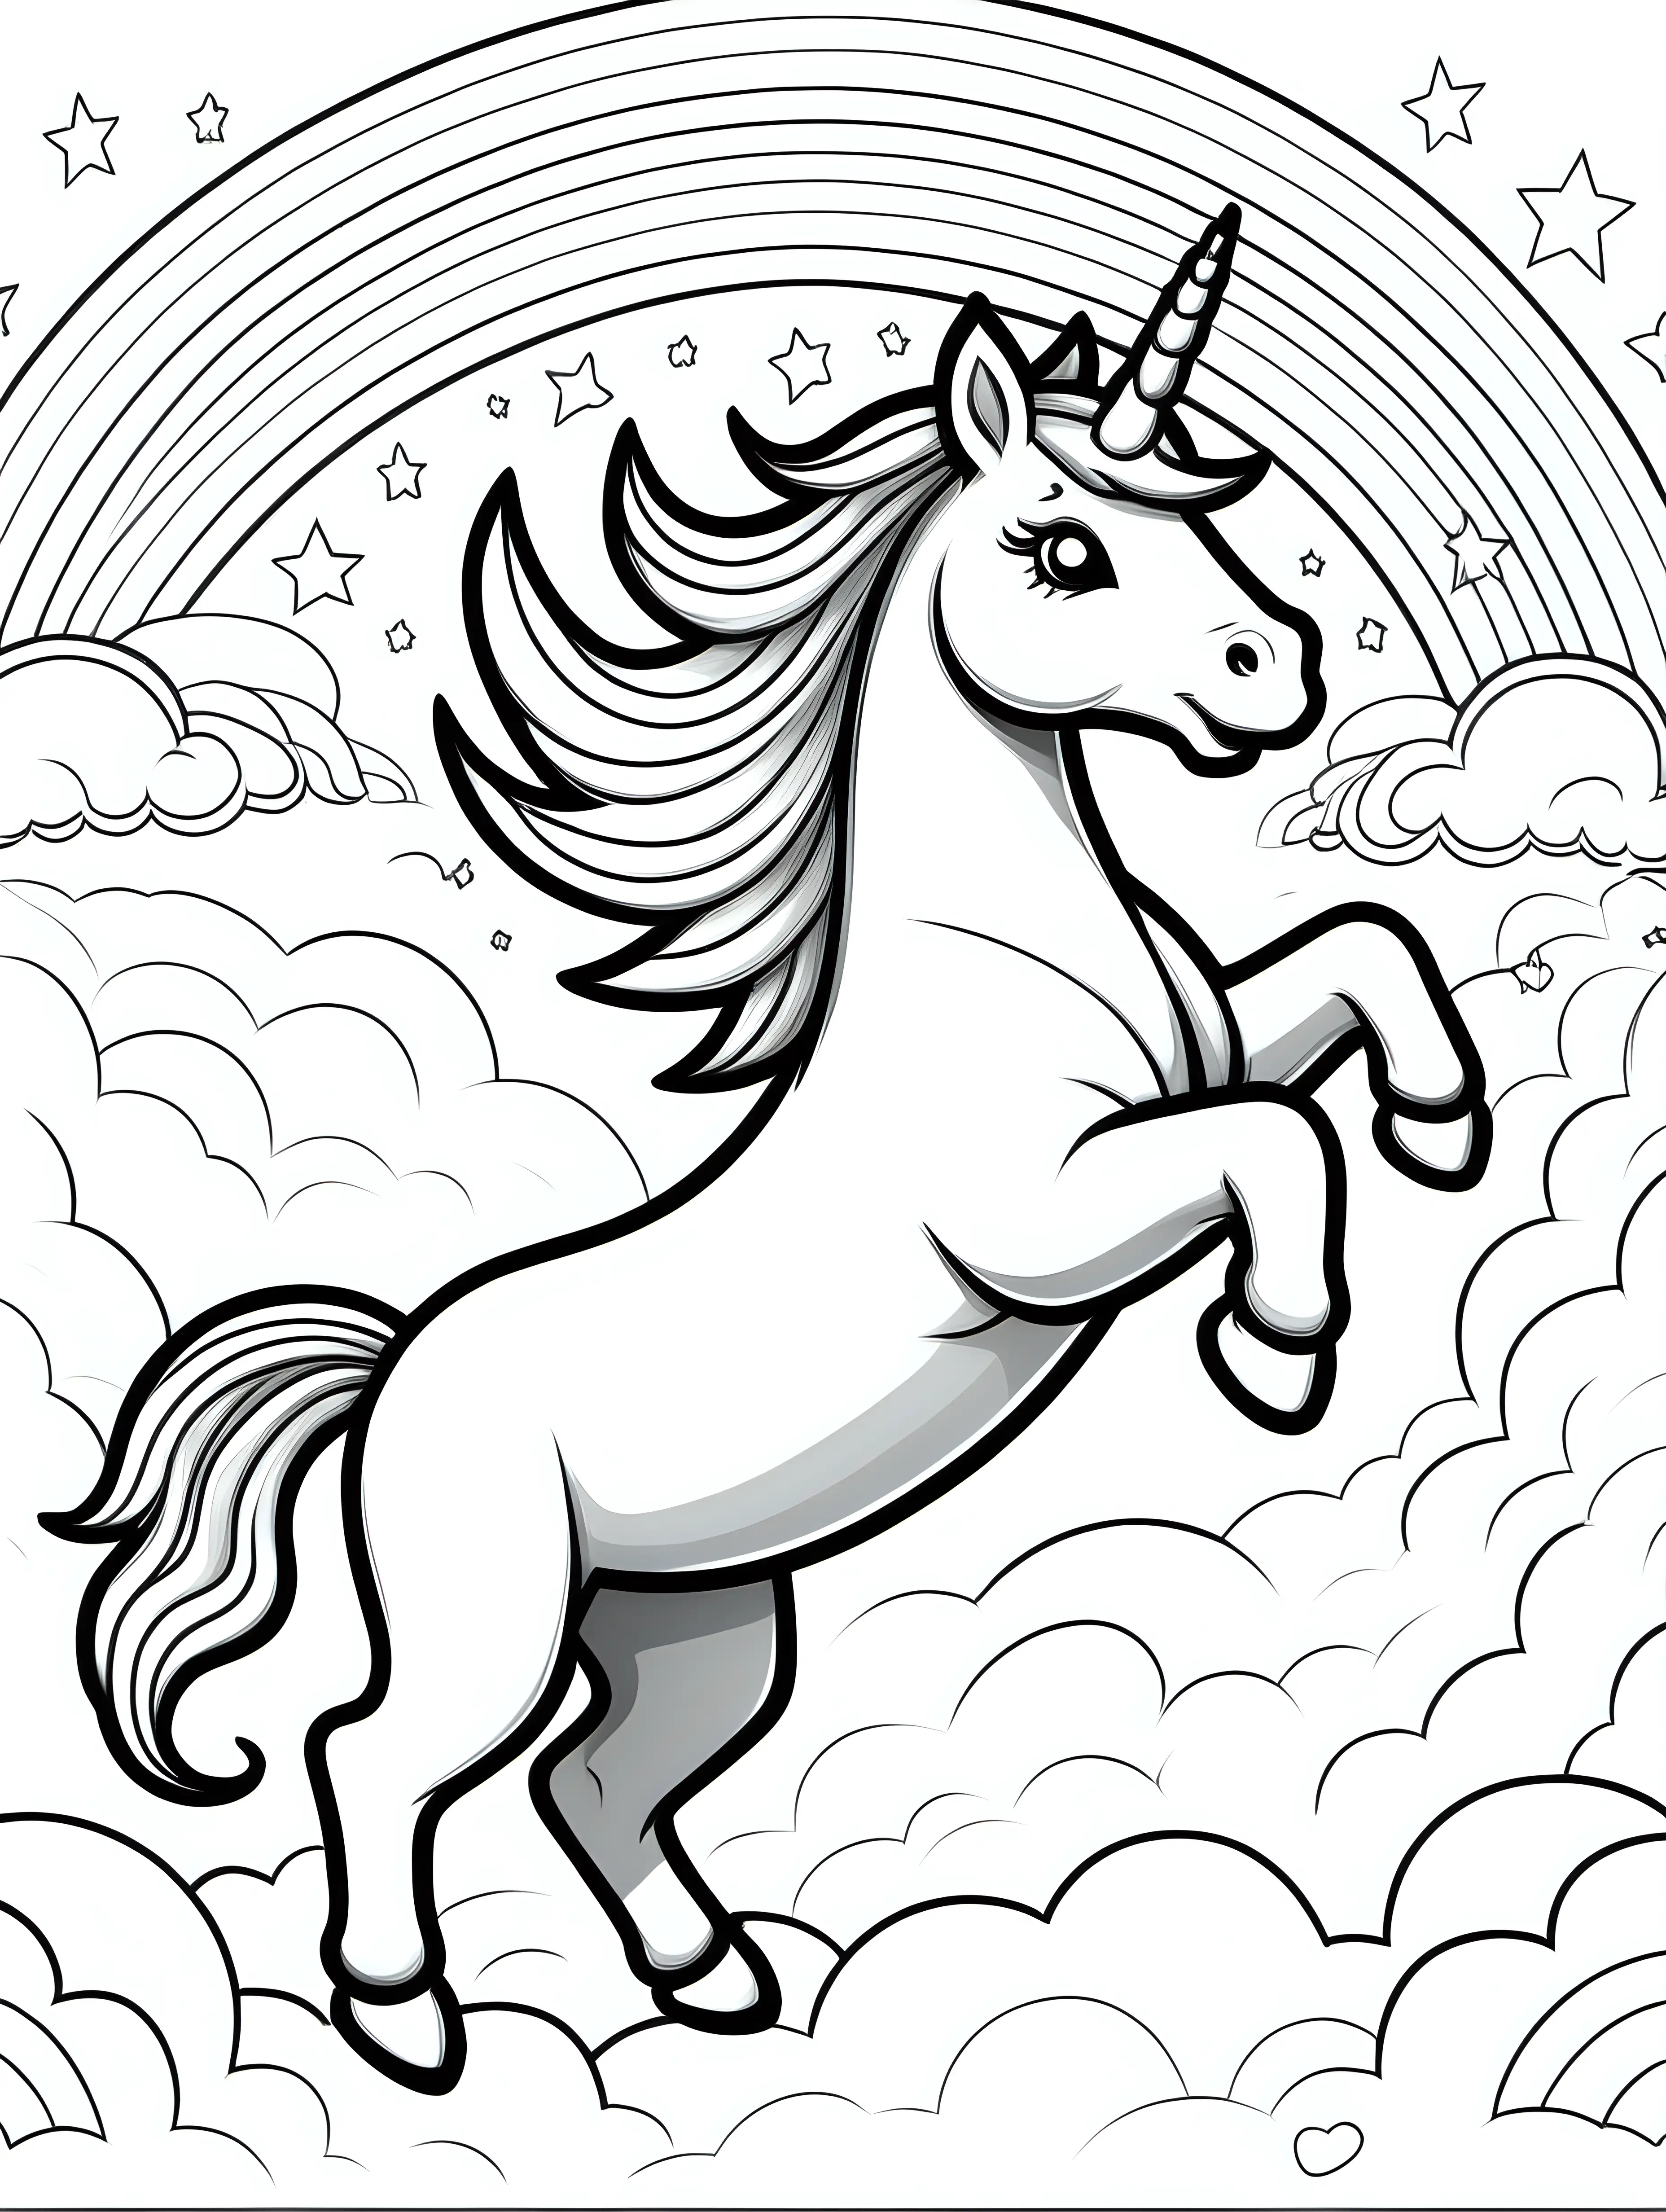 Playful Unicorn Jumping Over a Rainbow Coloring Page for Kids